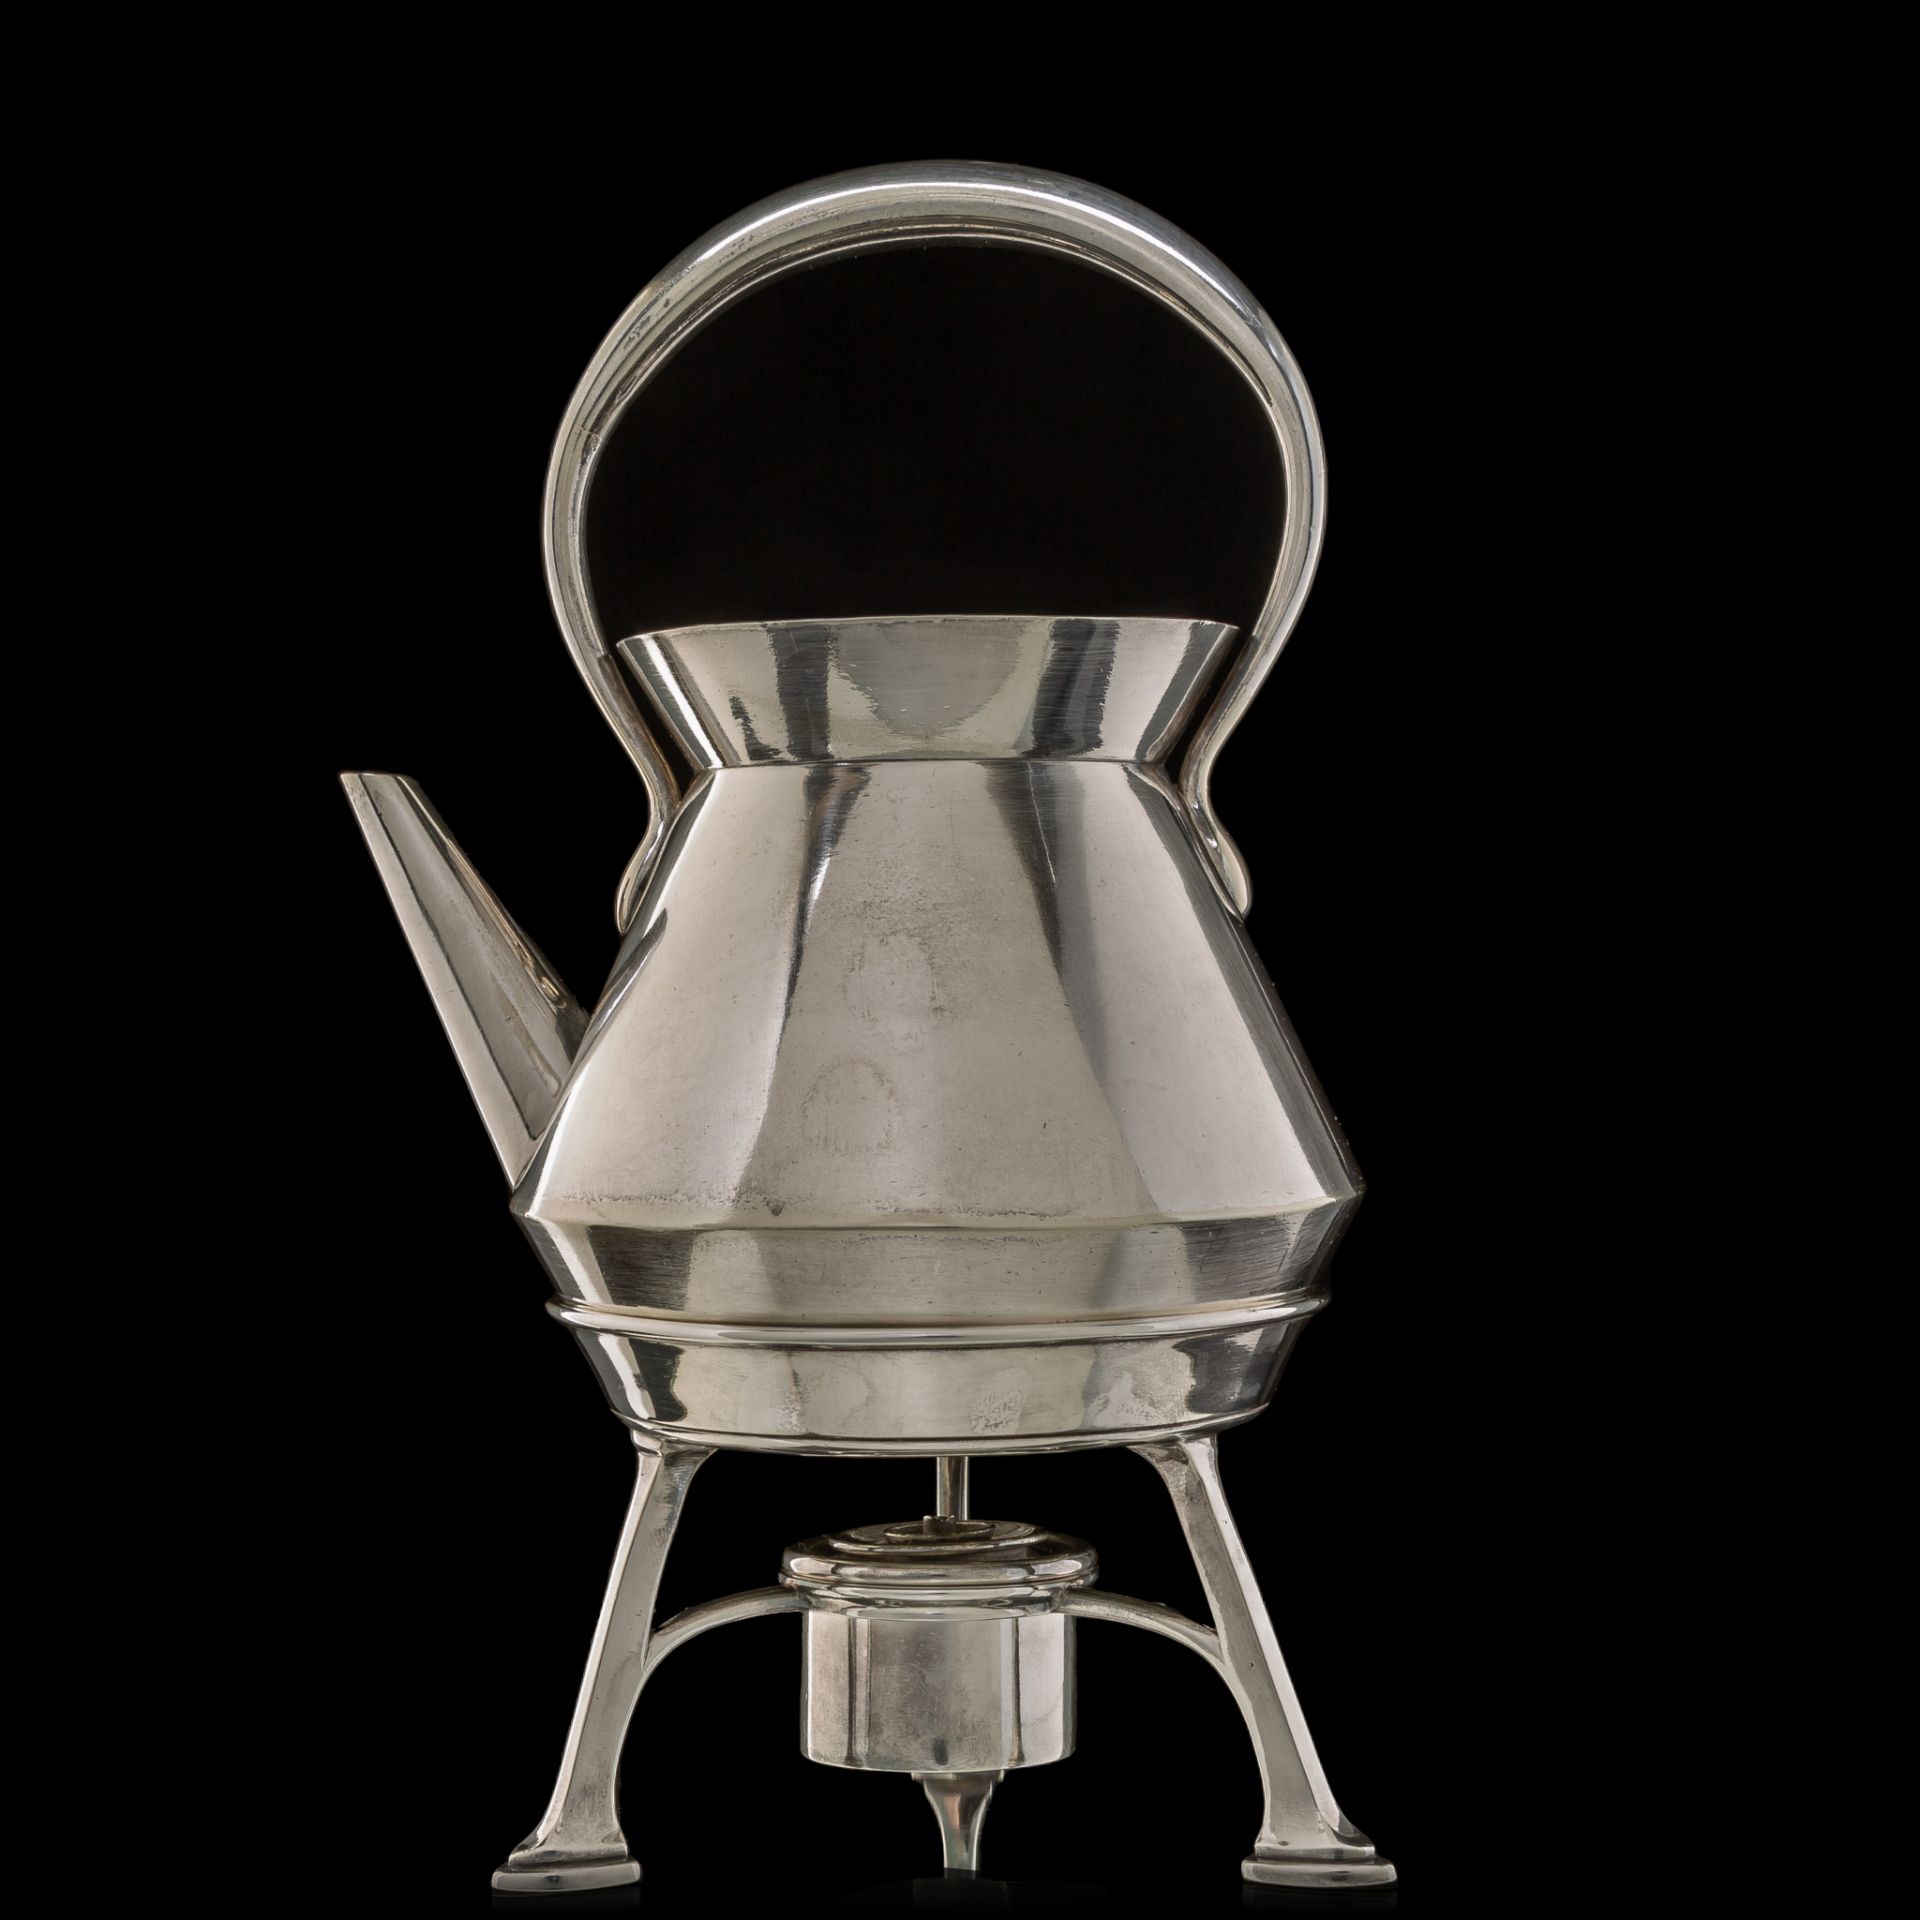 A silver-plated tea kettle, stand and burner, marked Richard Hodd, pre-1884, H 25 cm - Image 3 of 9